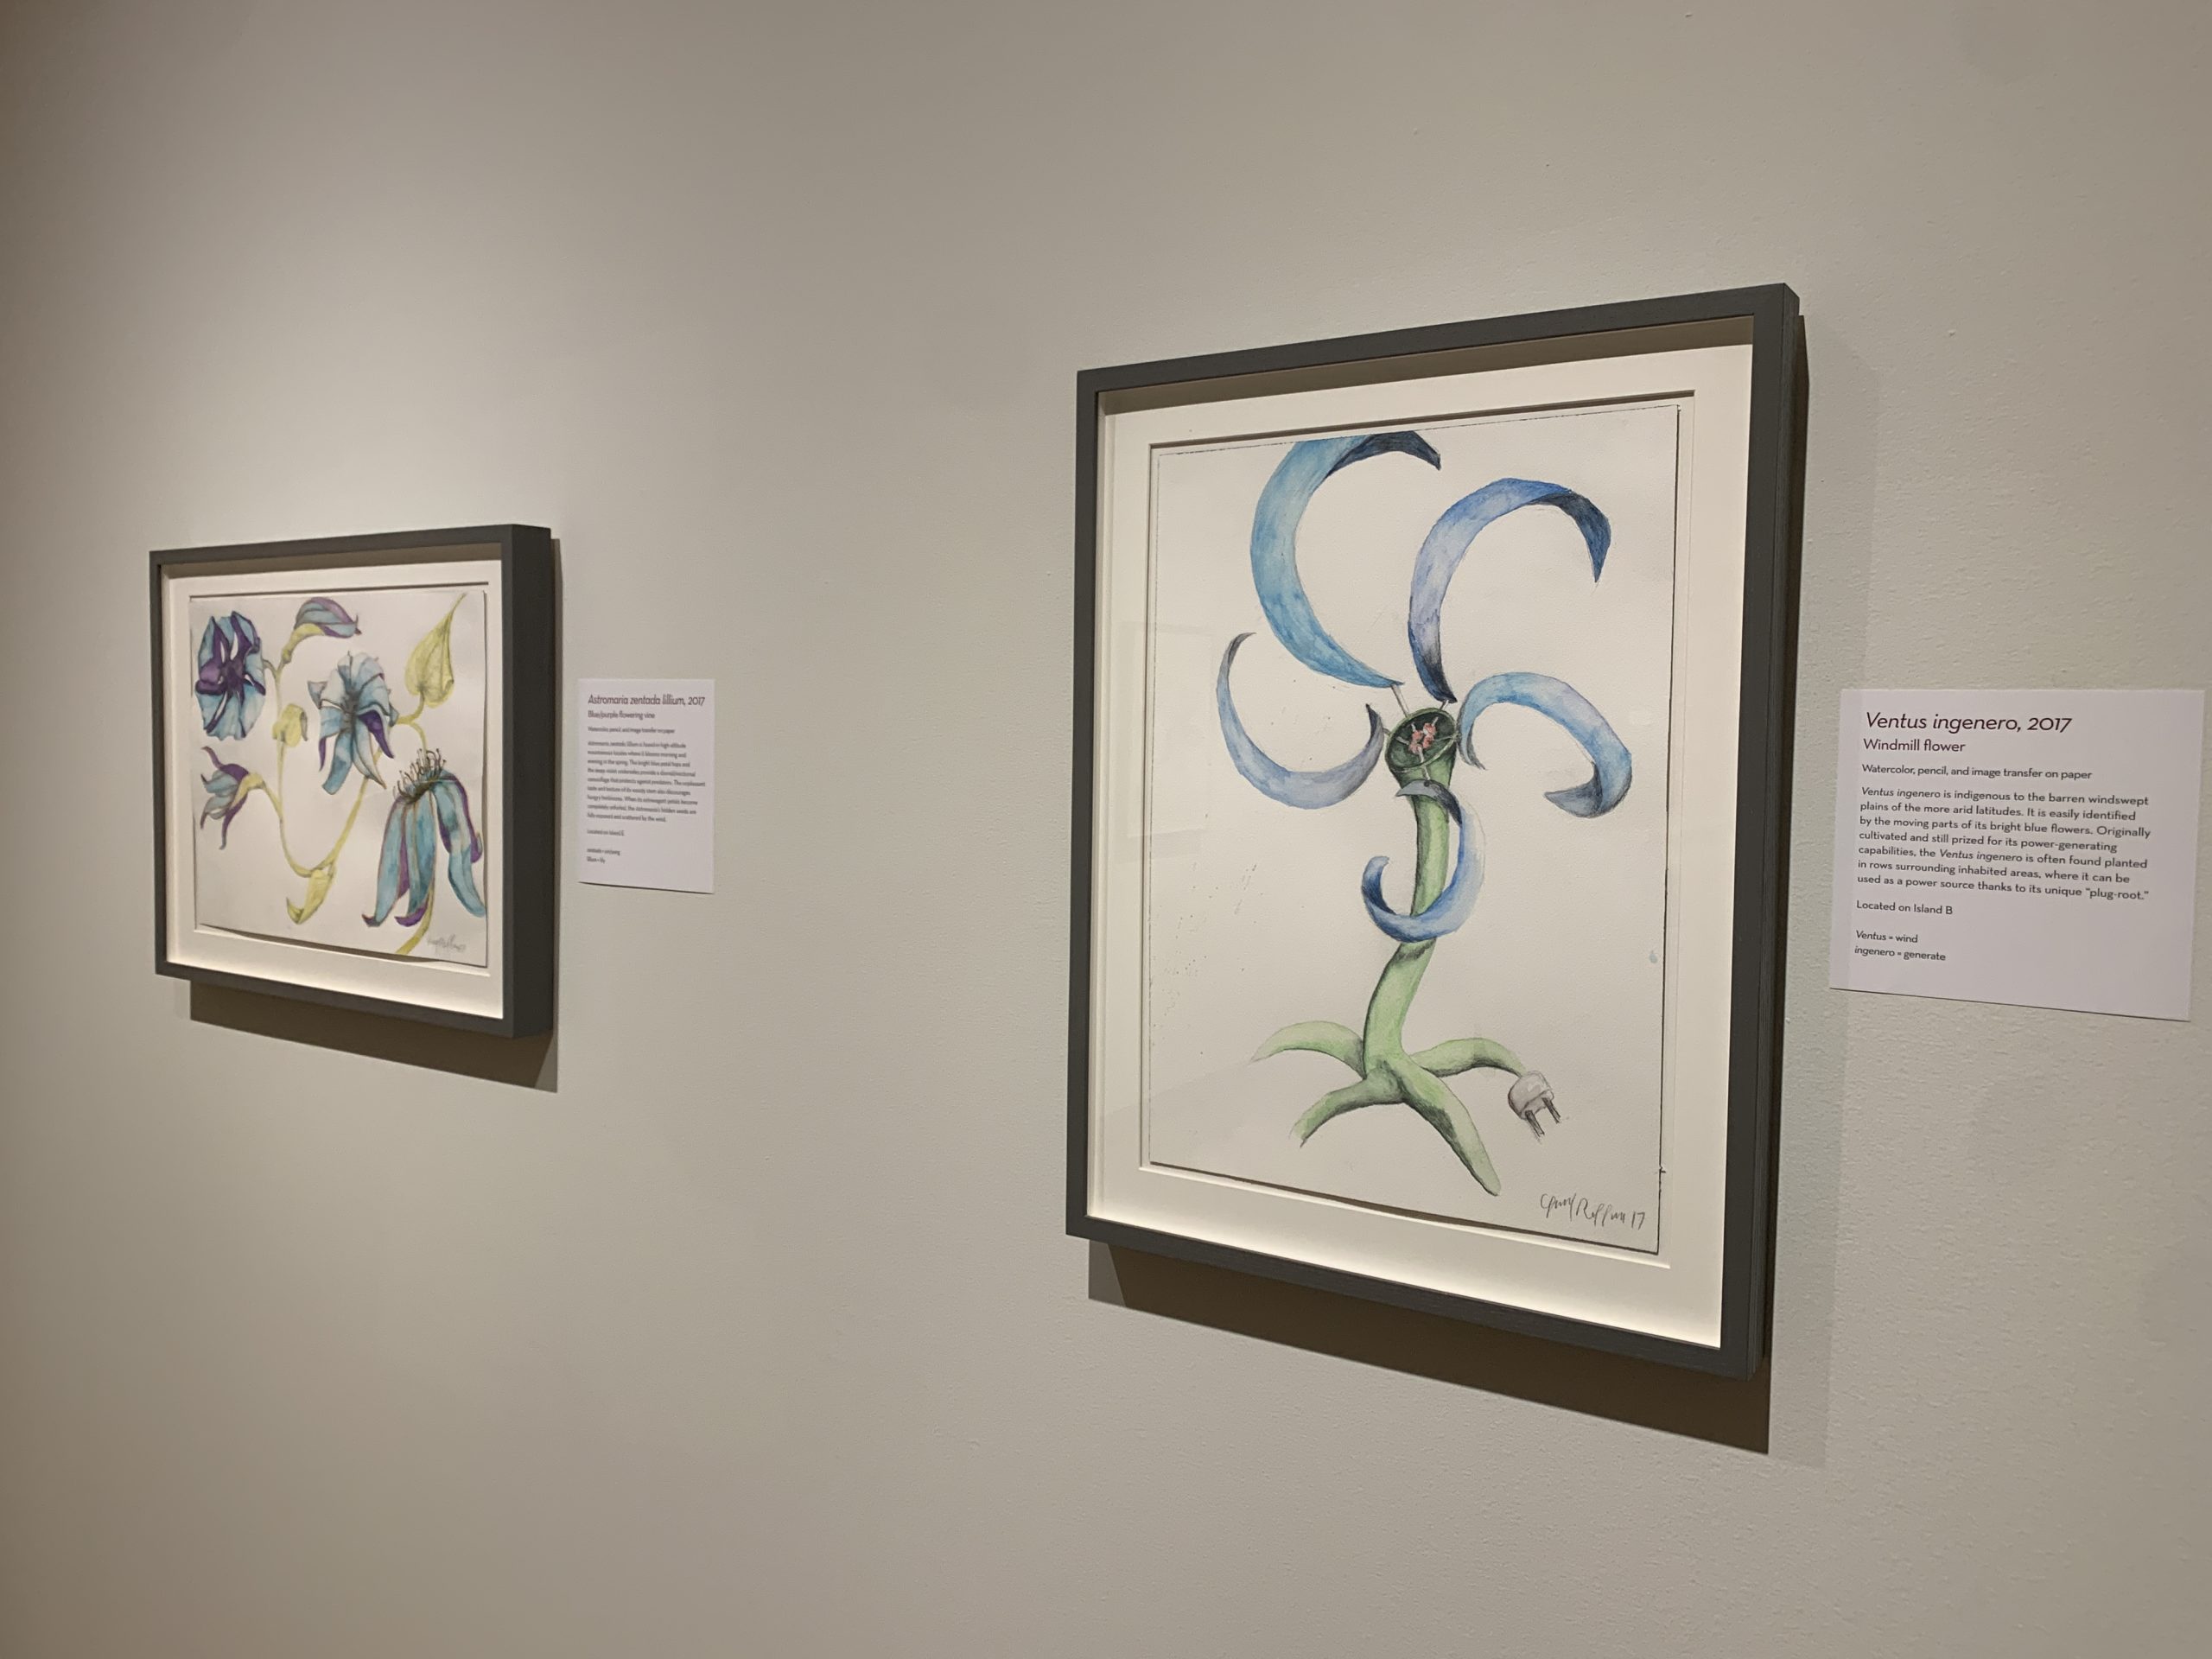 Drawings made with watercolor and colored pencil hang in a gallery, depicting a flower with windmill-like, blue petals. The stem of the flower turns into an electrical plug.